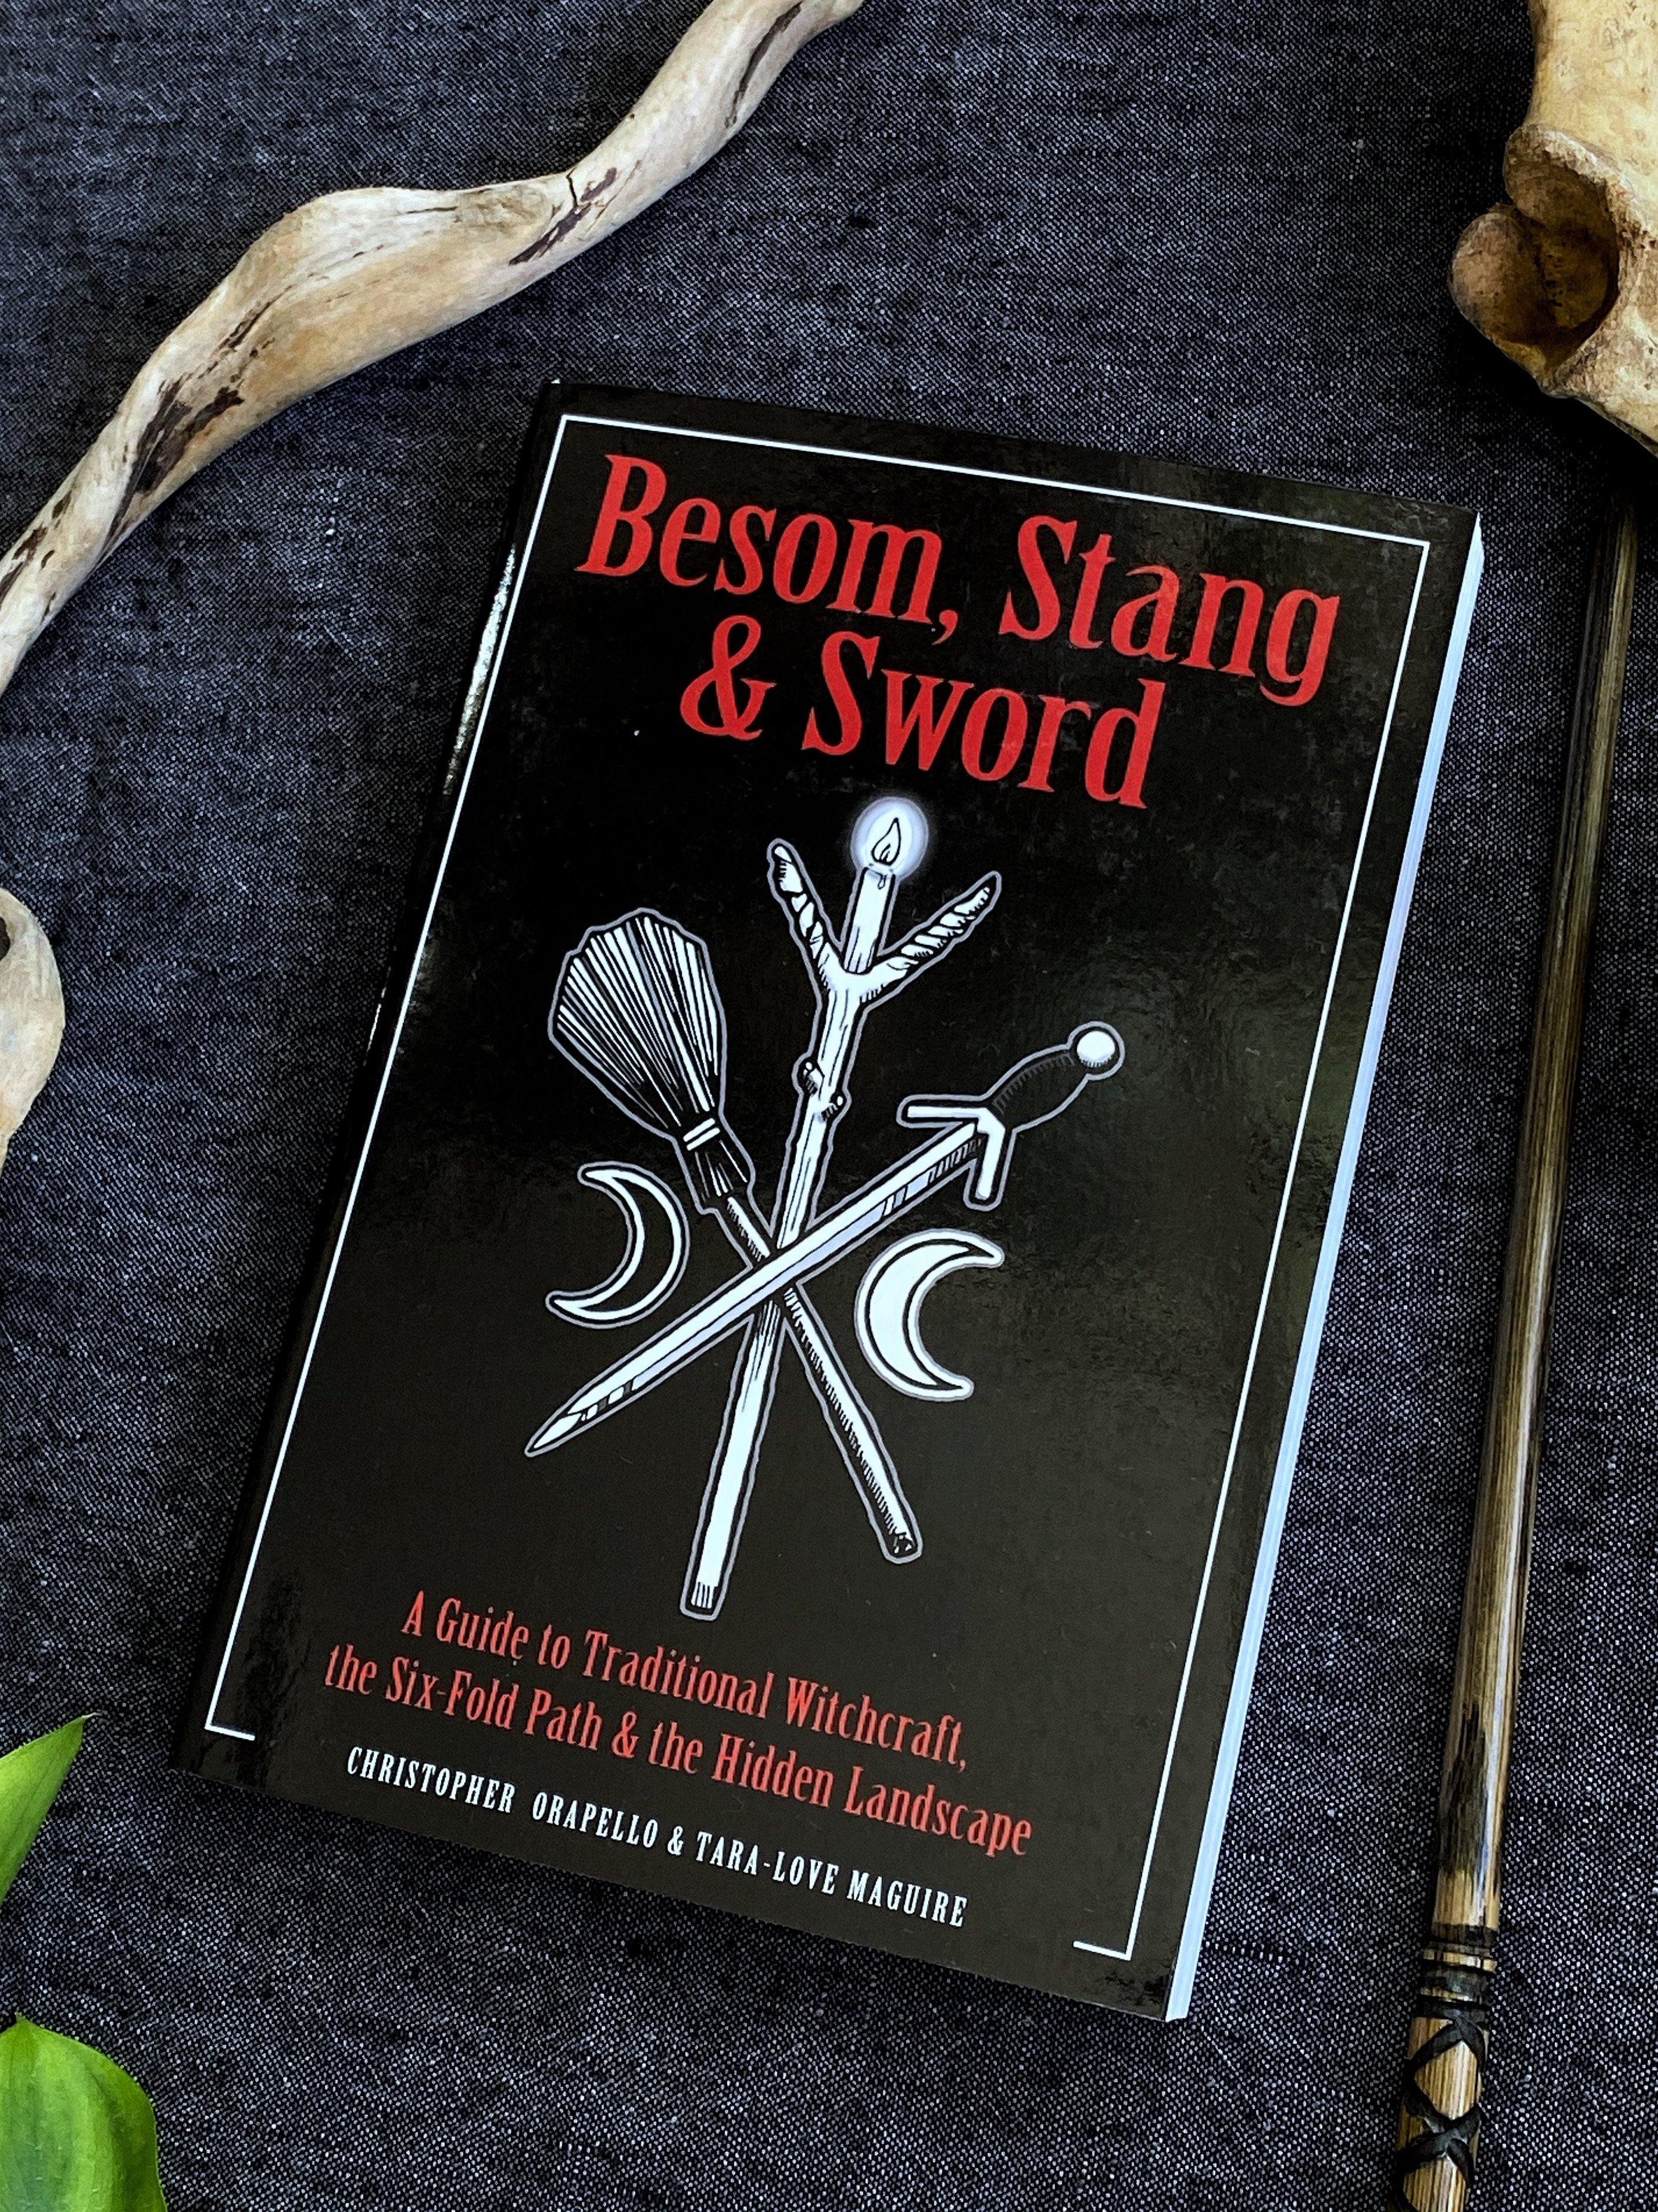 Besom, Stang & Sword: A Guide to Traditional Witchcraft, the Six-Fold Path & the Hidden Landscape - Keven Craft Rituals